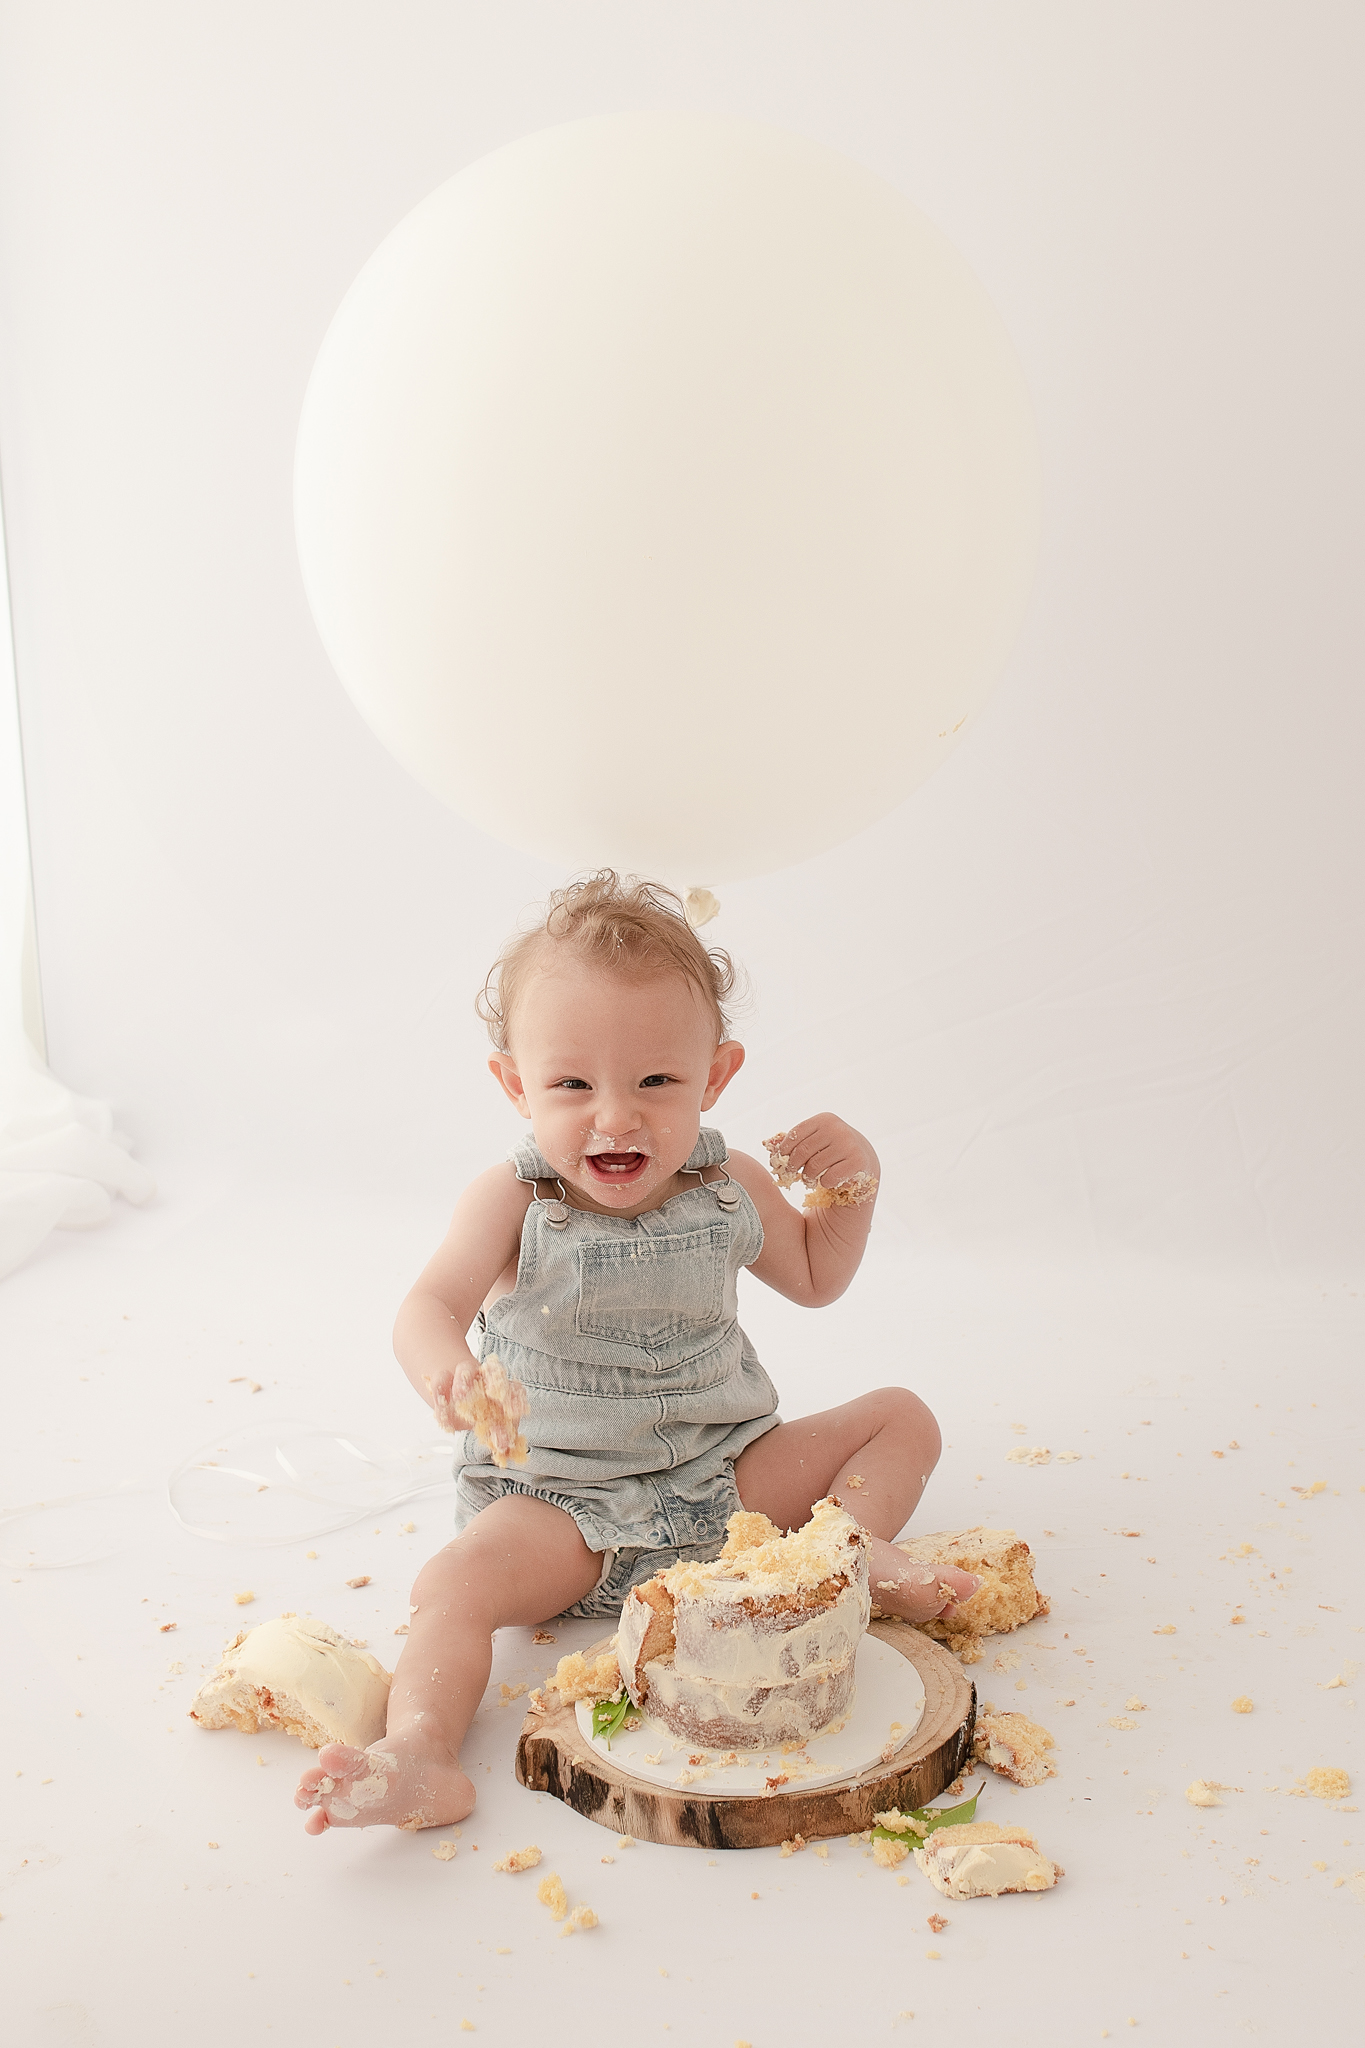 very happy excited one year old boy smashing cake in photo studio